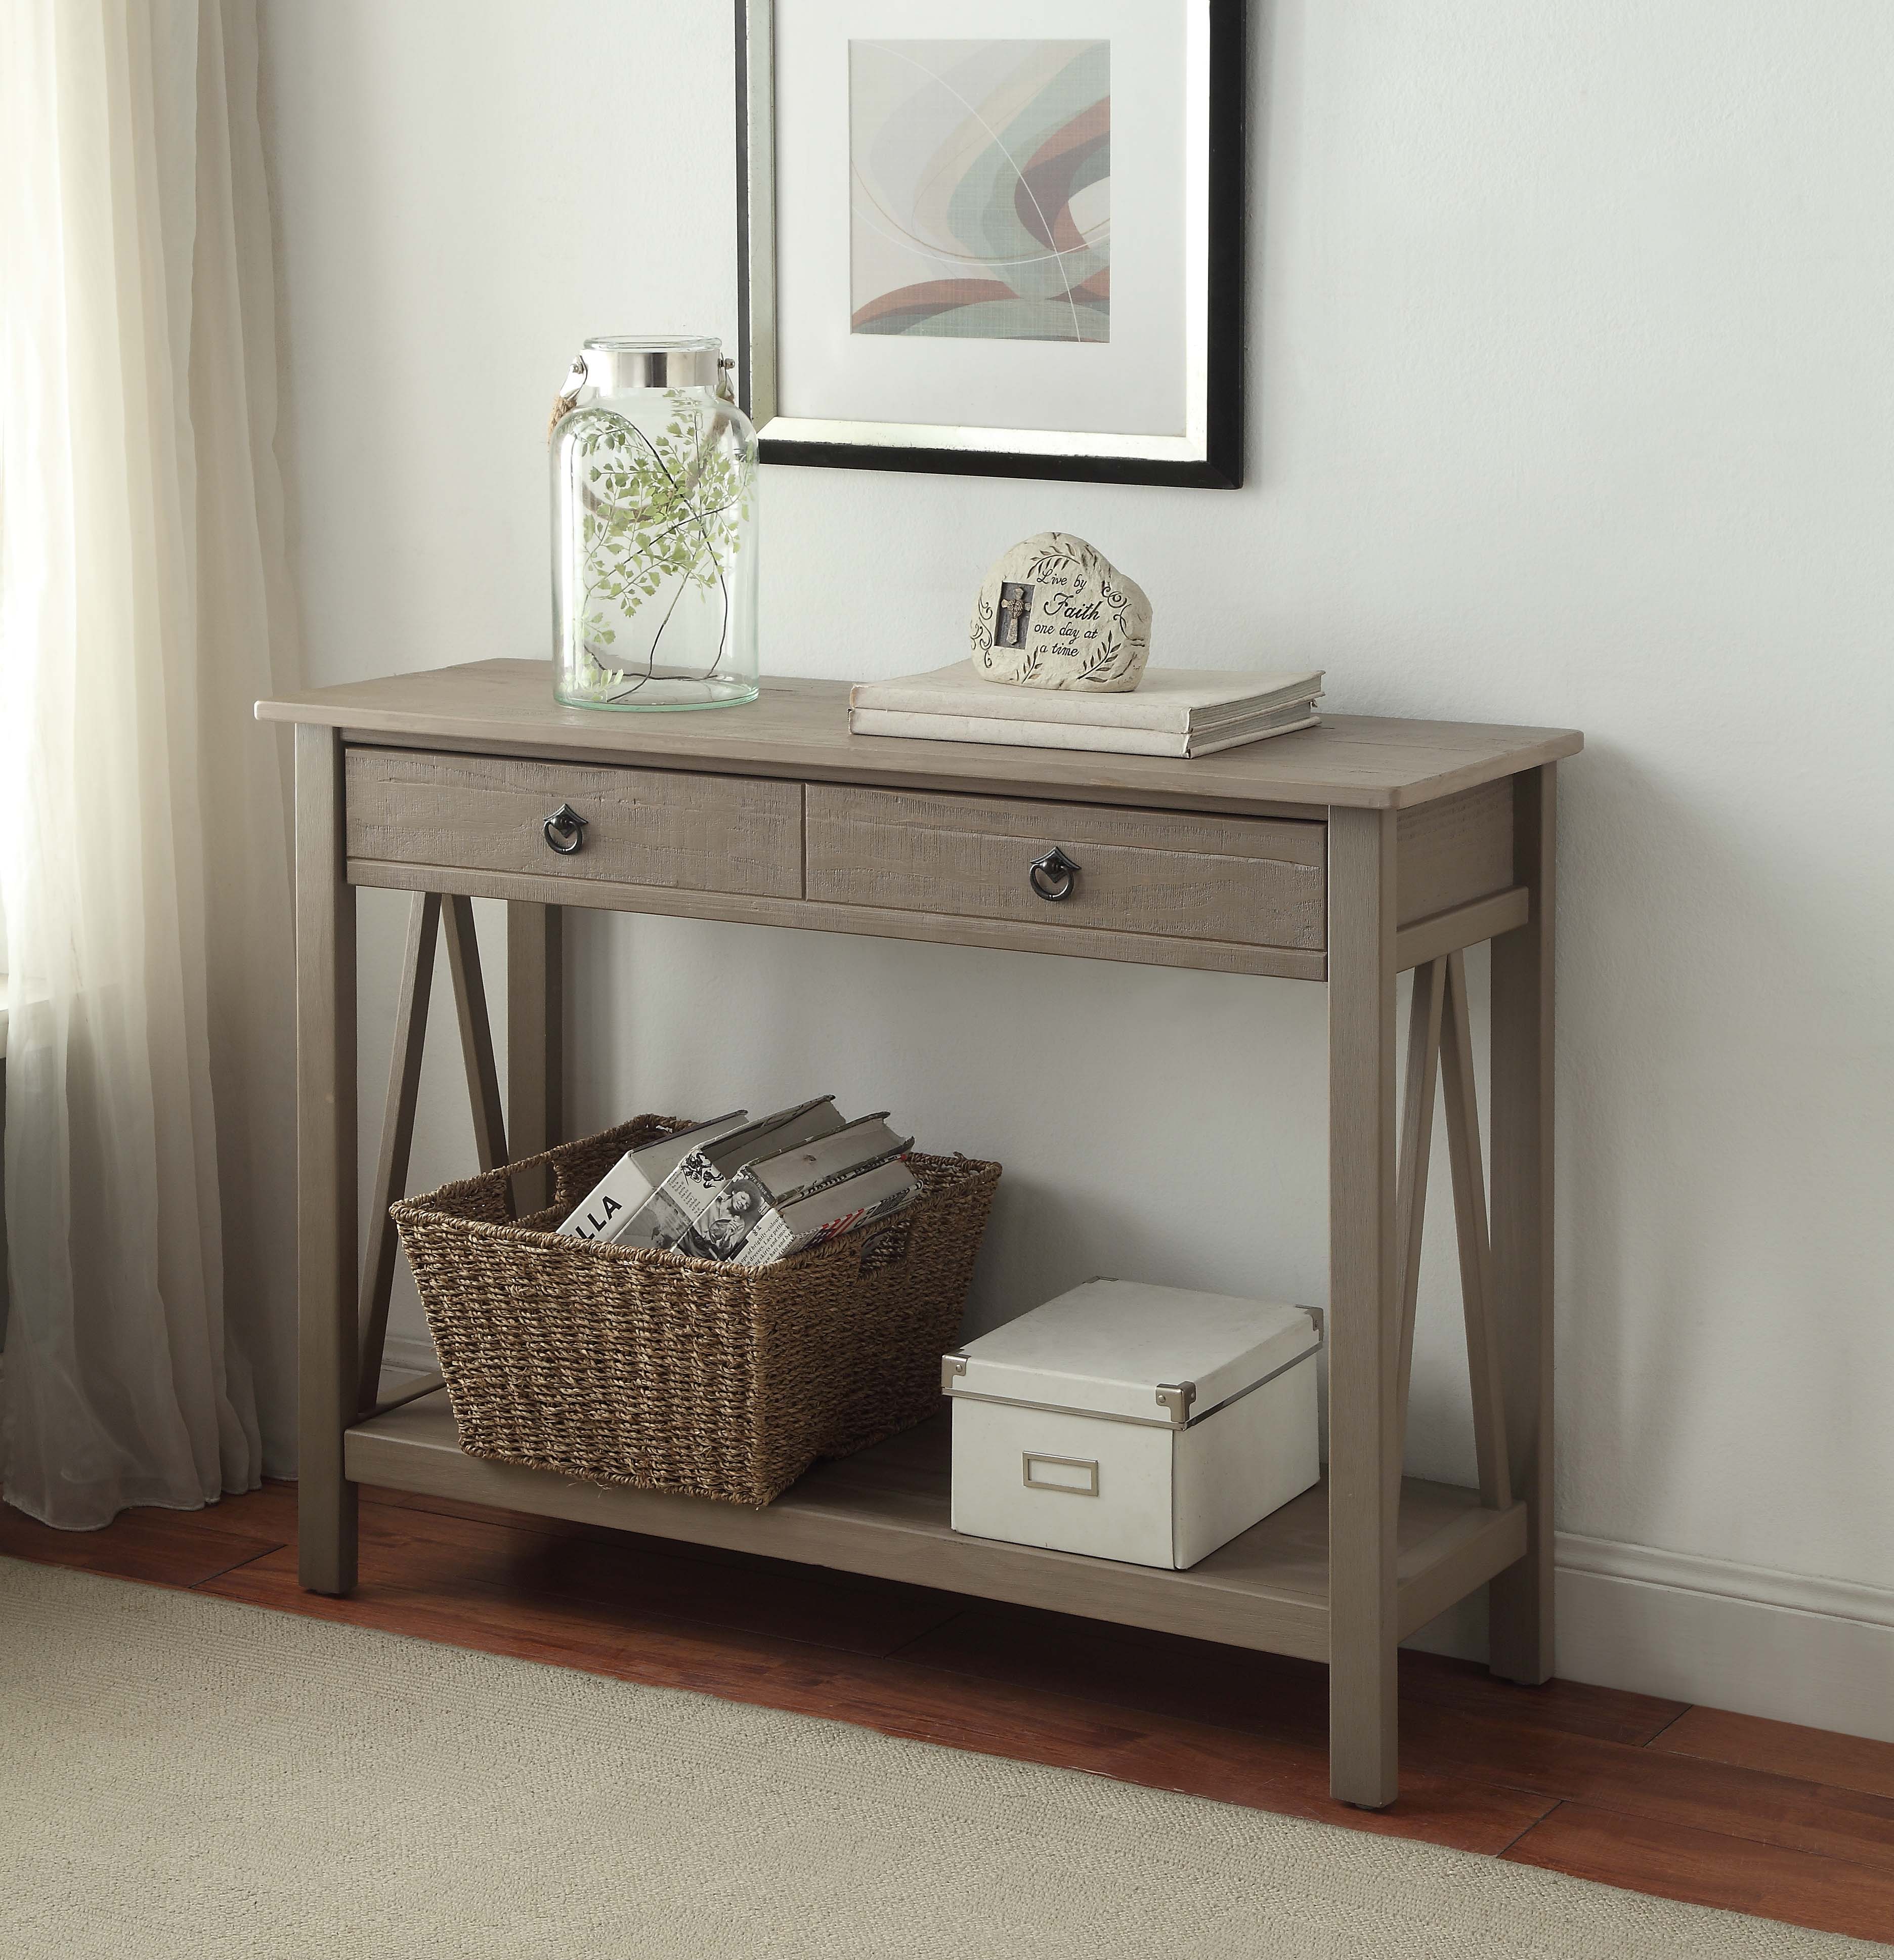 linon titian rustic gray console table products accent prefinished solid hardwood flooring adirondack chairs kitchen and gateleg candle decorations threshold rugs coffee with